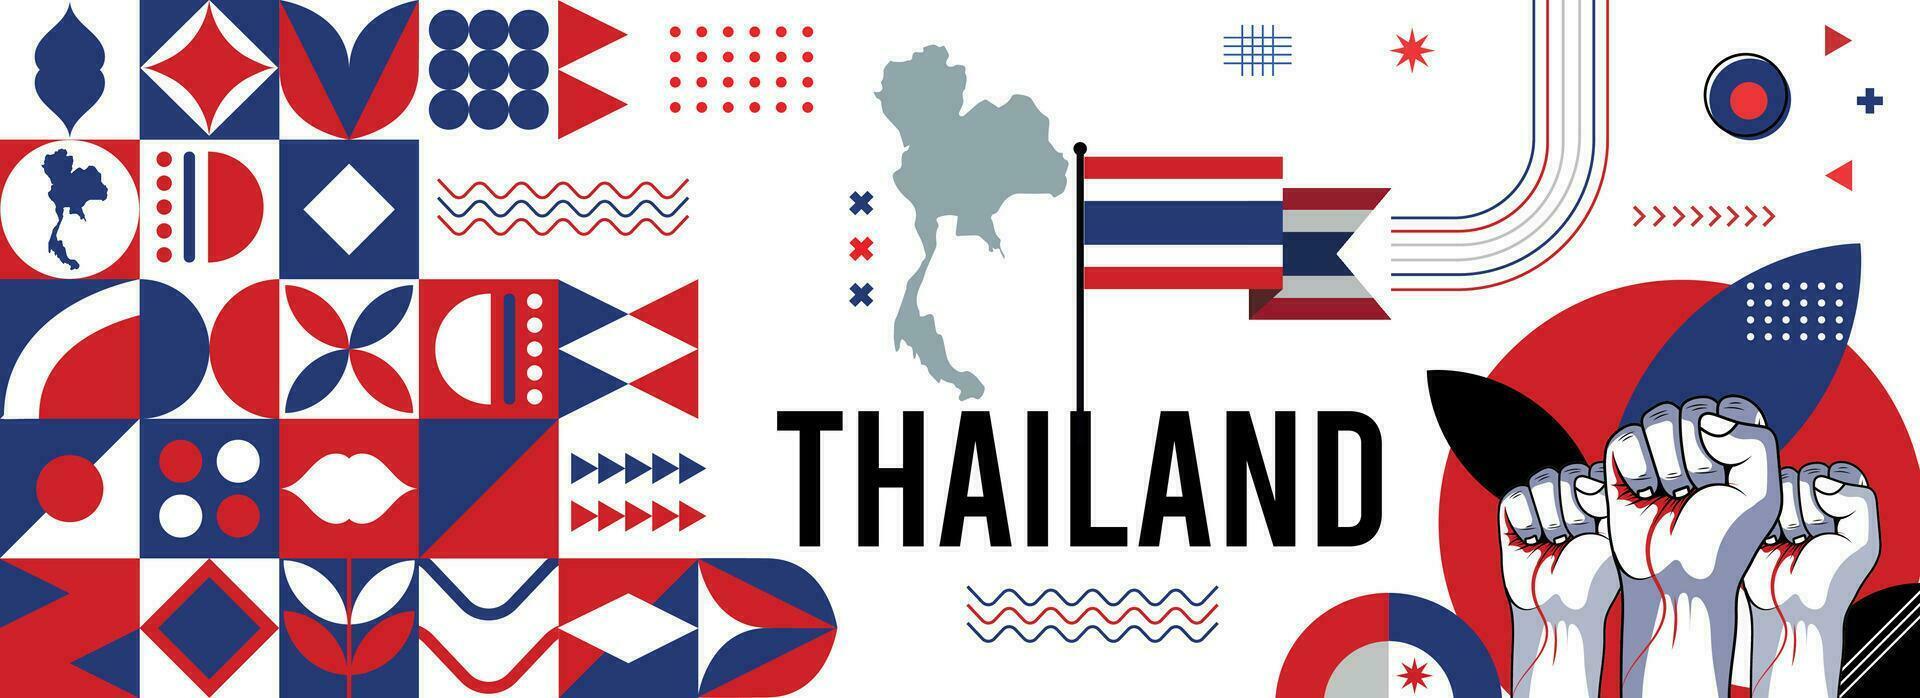 Thailand national day banner with abstract modern design. Flag and map of thailand with typography red blue color theme background vector